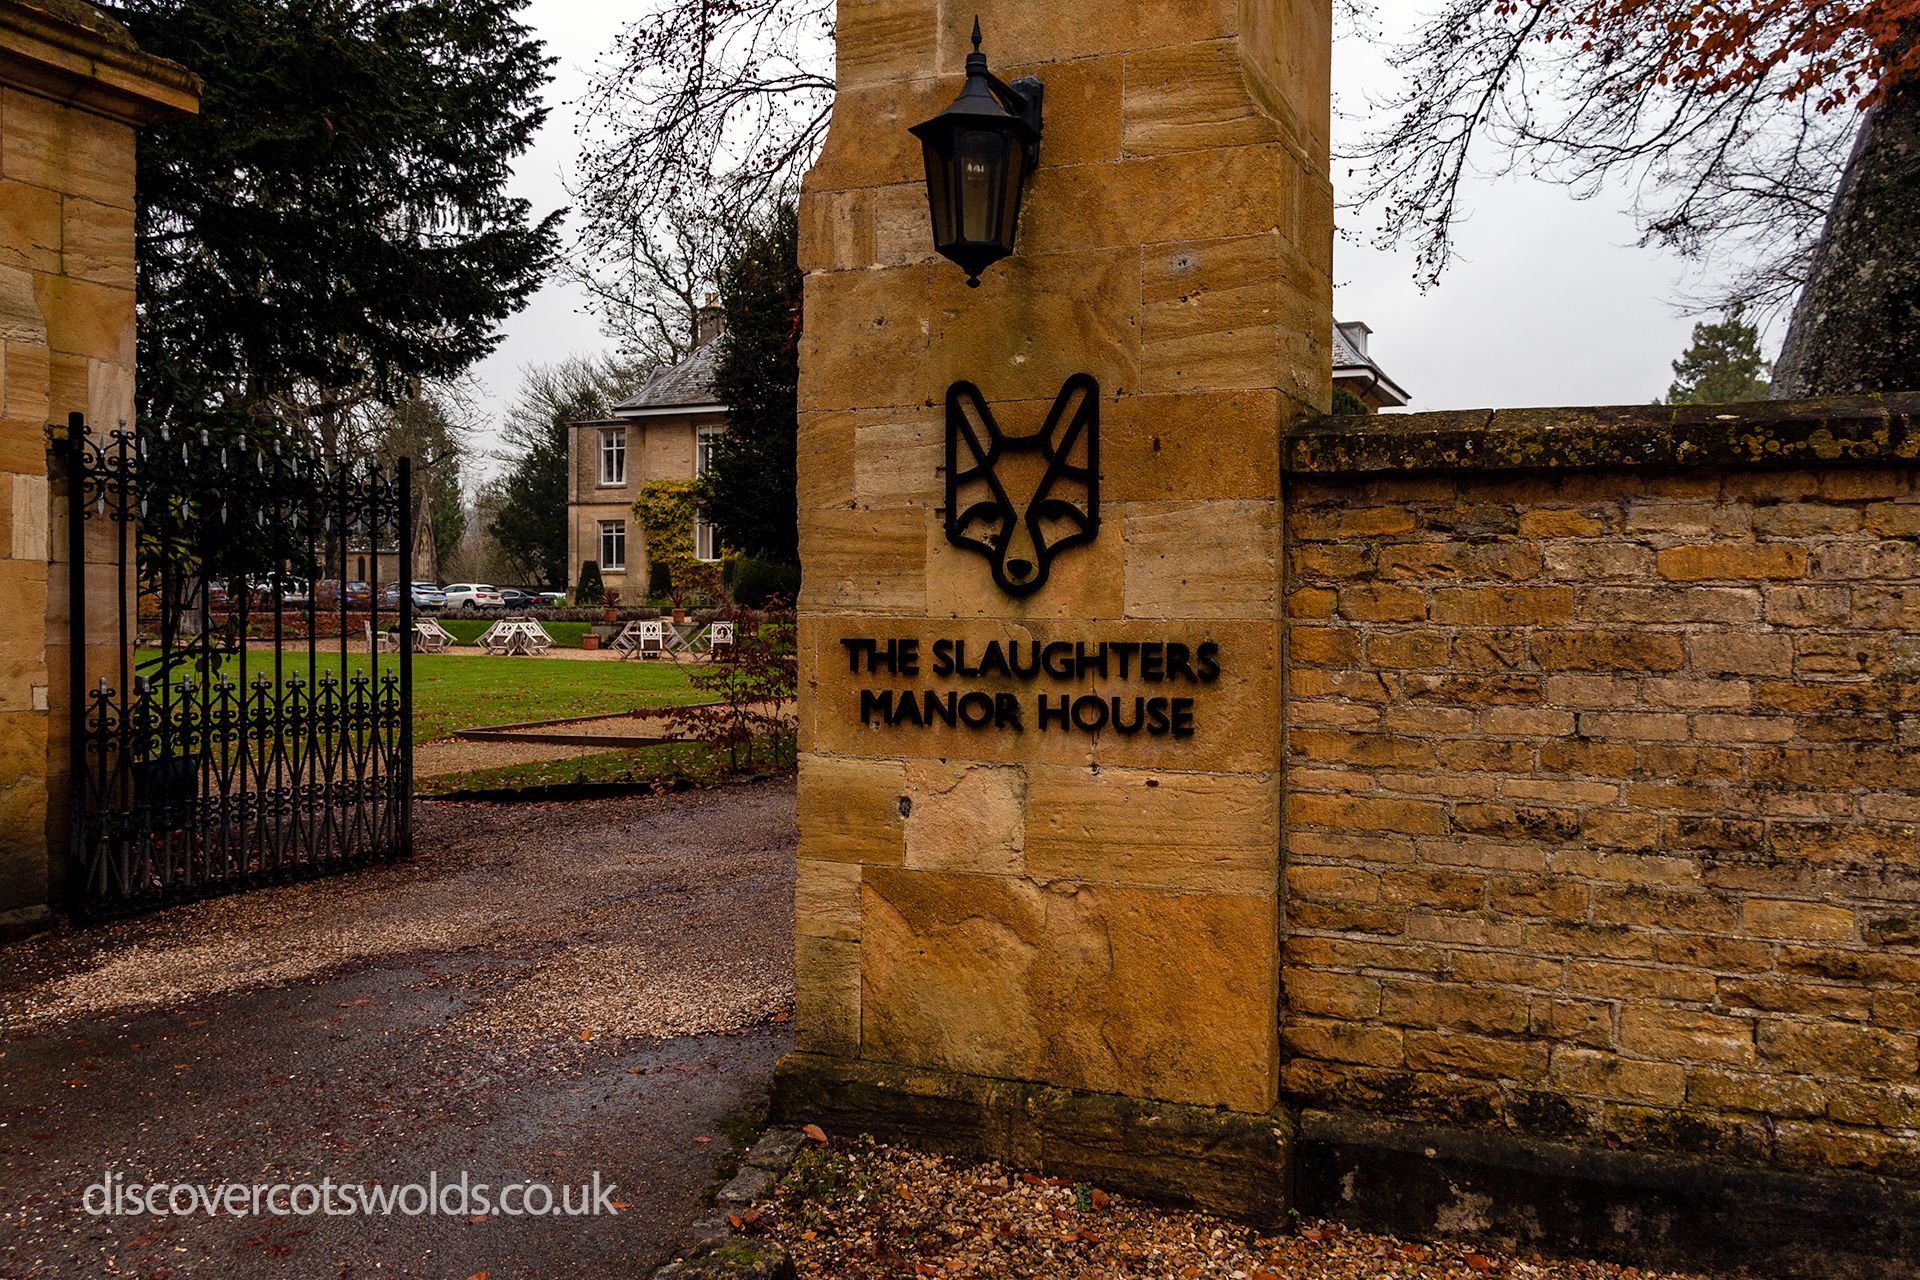 Entrance to the Slaughters Manor House